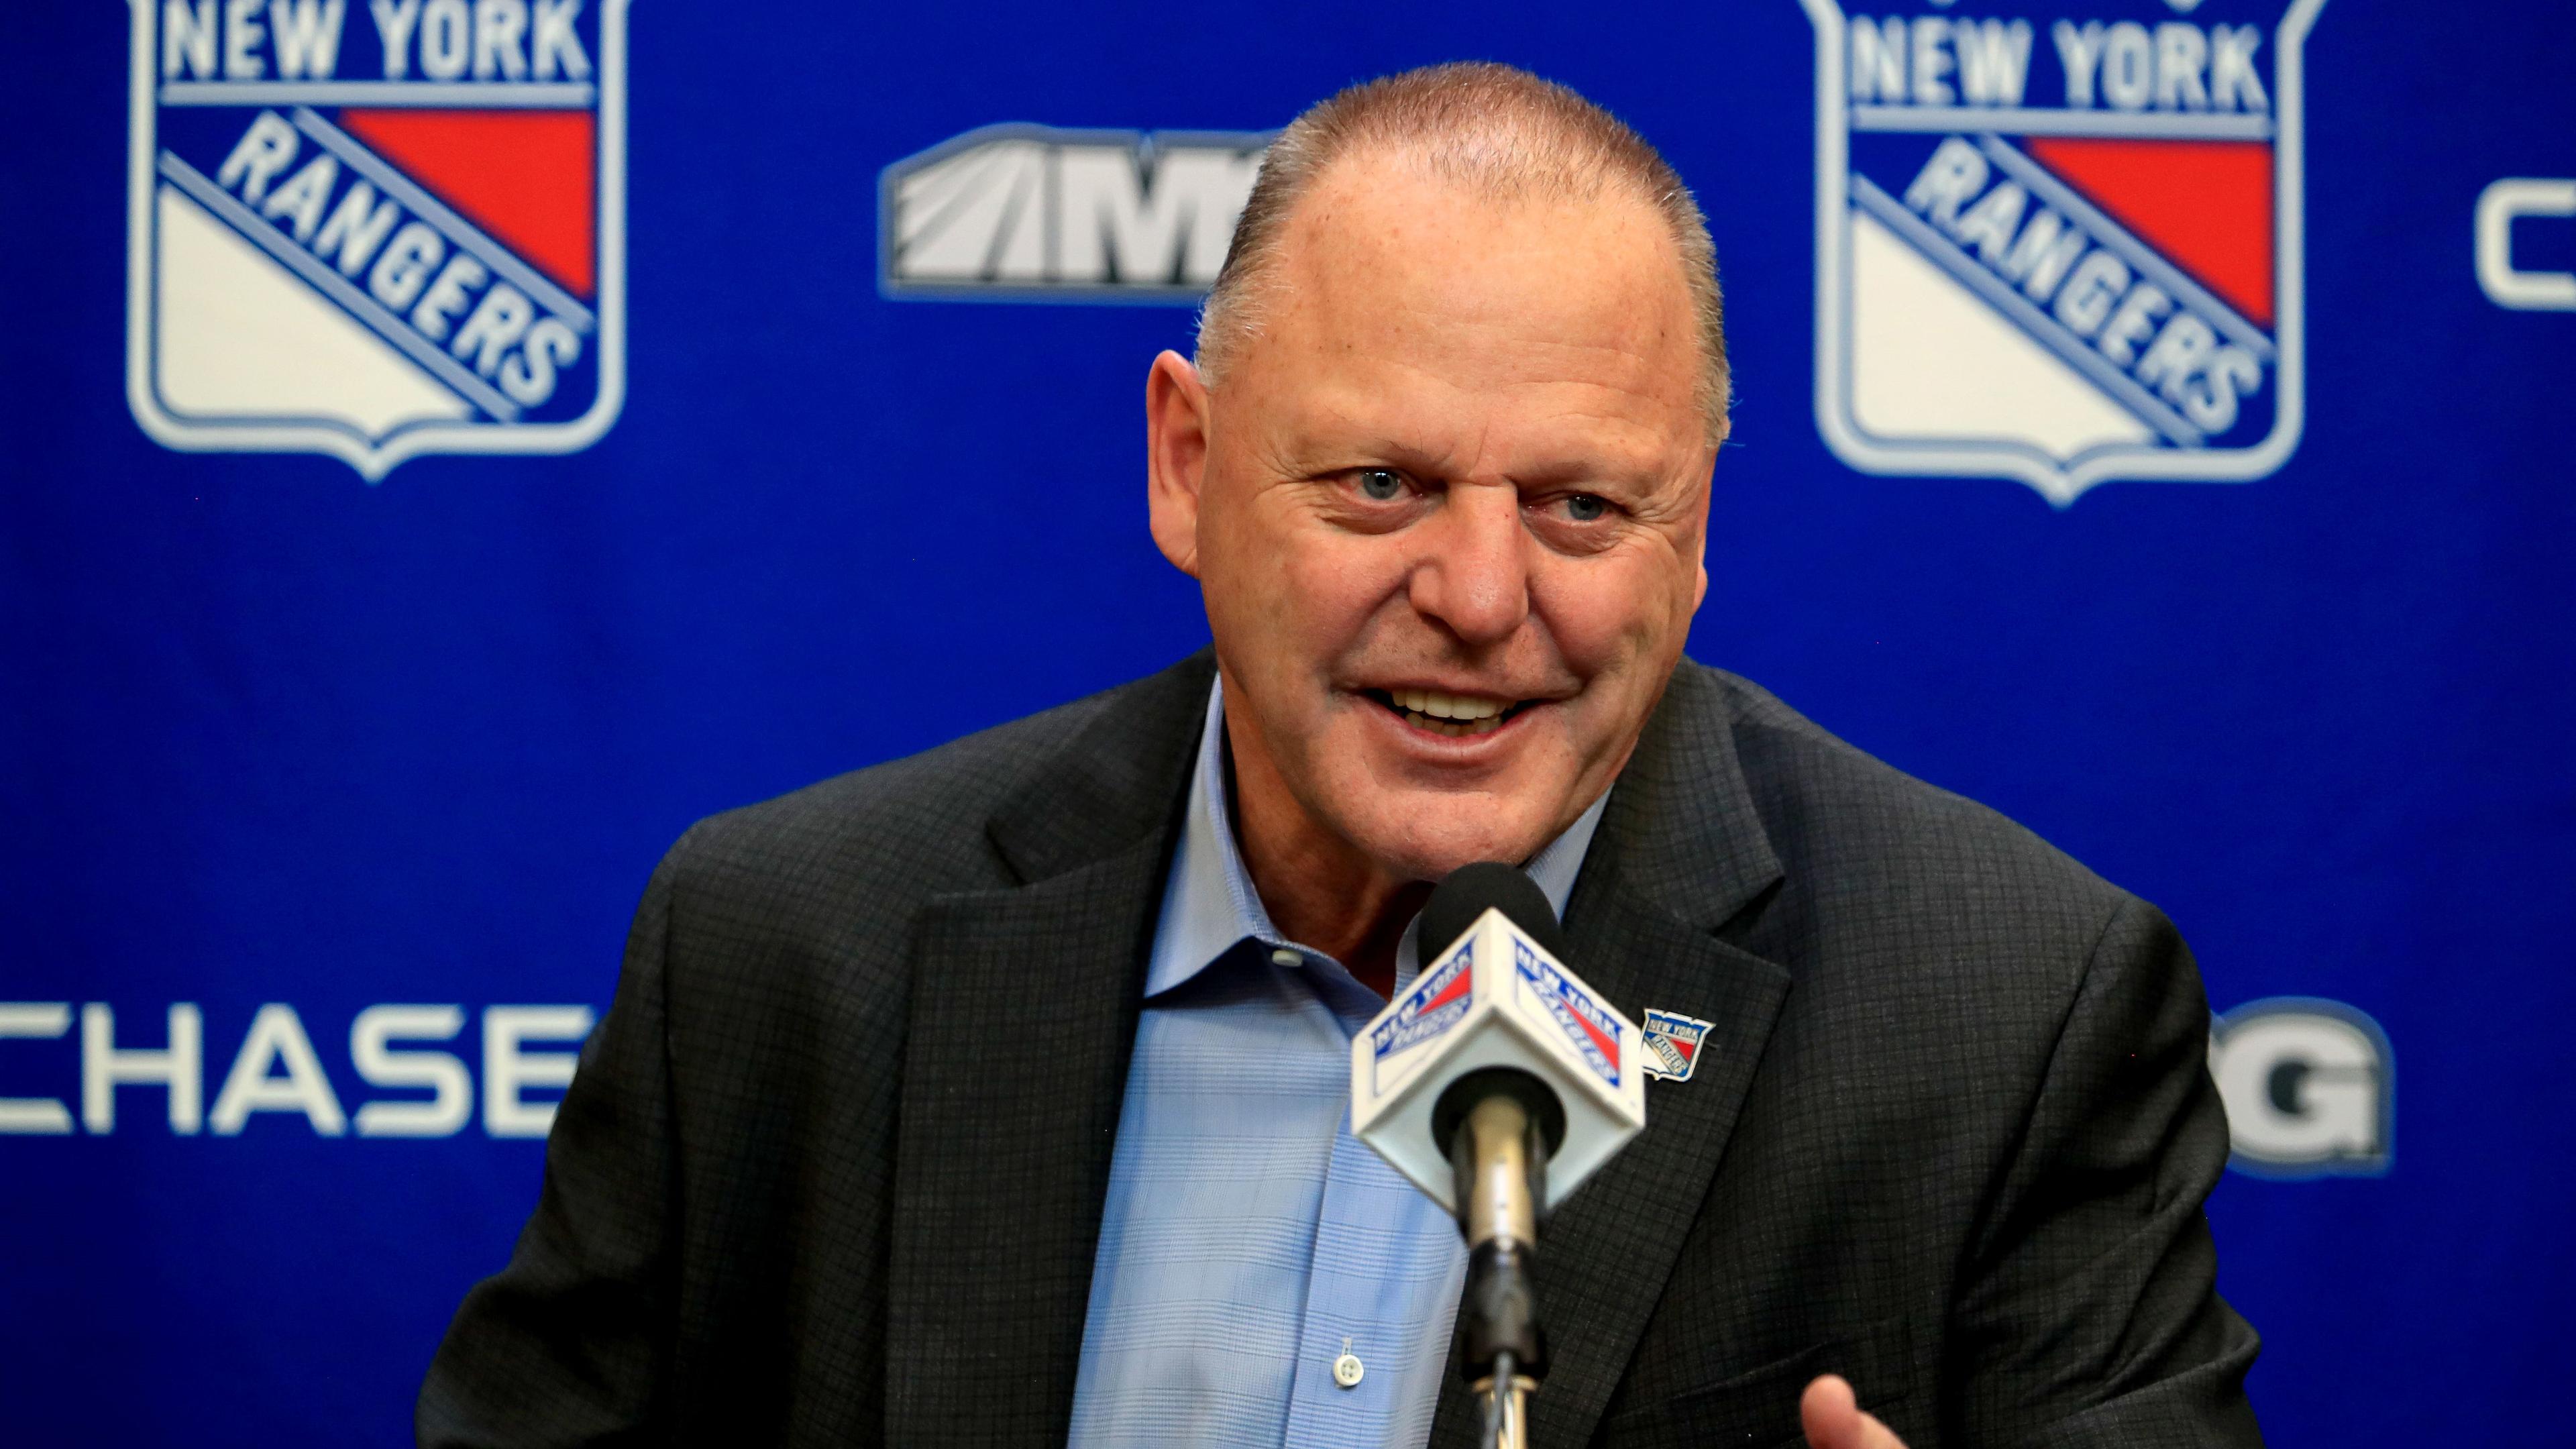 New York Rangers head coach Gerard Gallant speaks to the media following a 3-2 win against the Washington Capitals at Madison Square Garden. / Danny Wild - USA TODAY Sports